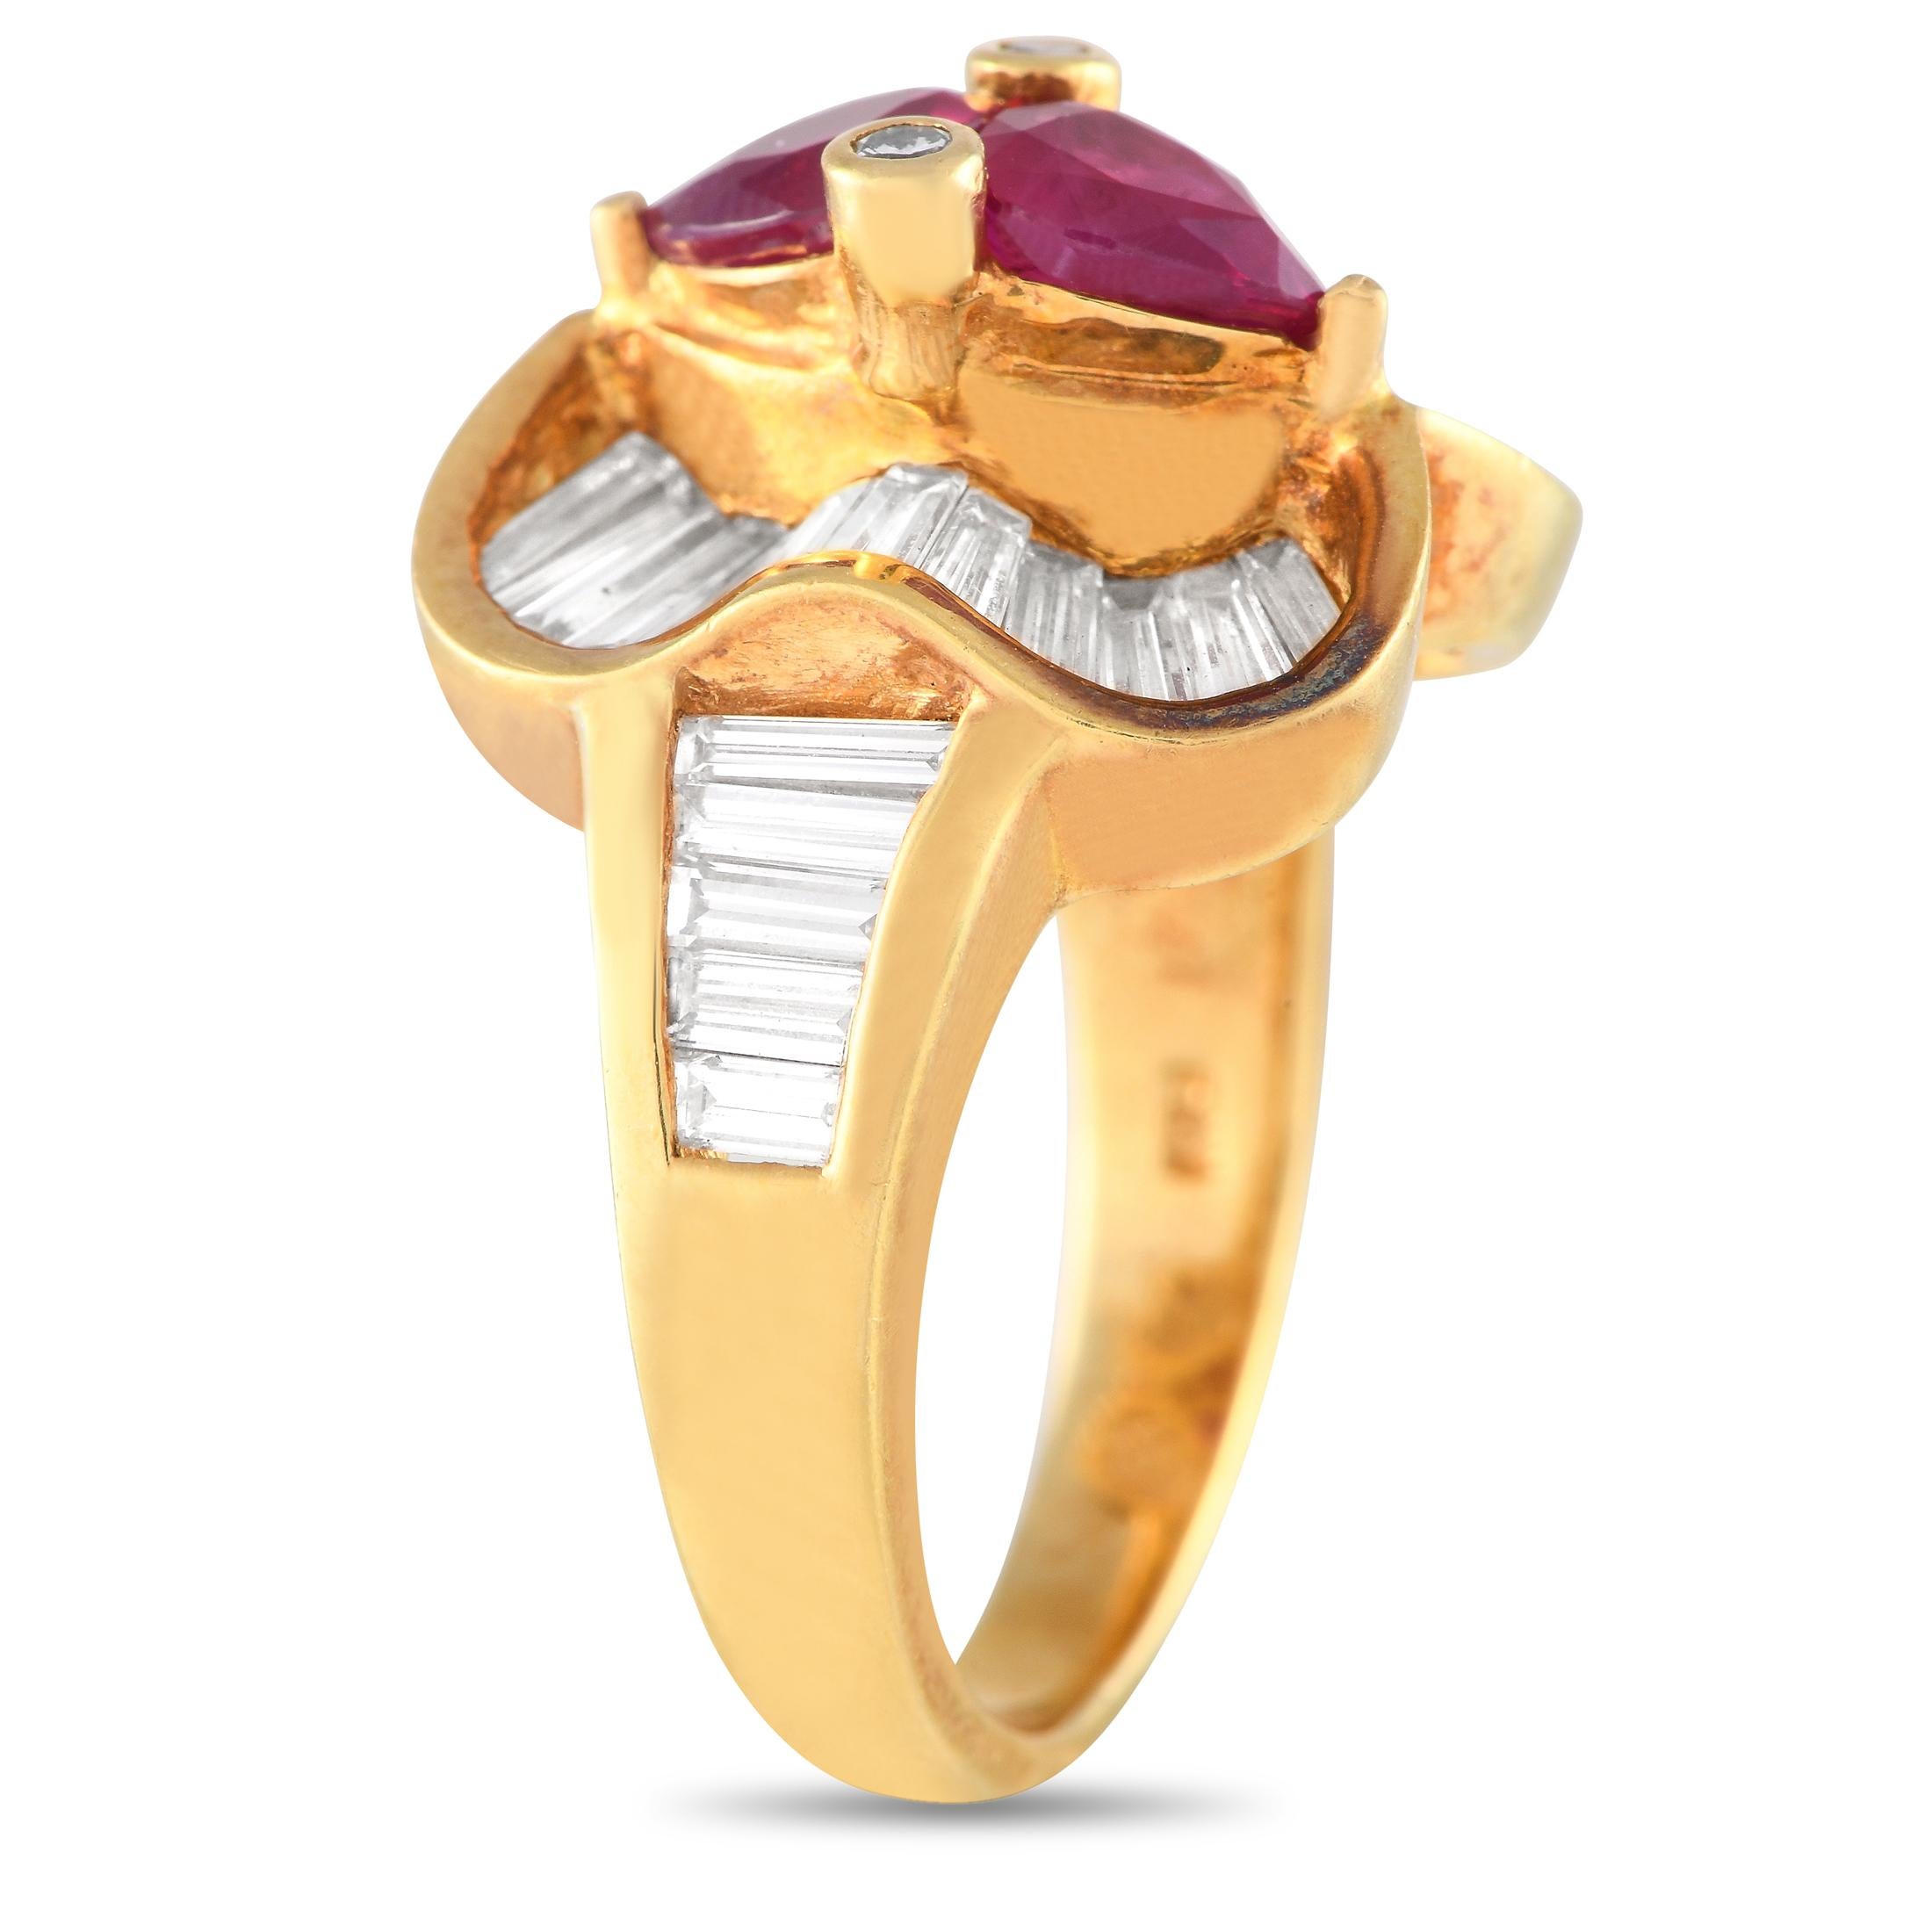 Smooth curves, clean lines, and subtle flashes of light make up the Art Deco geometric beauty of this ring. The band is fashioned in 18K yellow gold and has its shoulders decorated with tapering baguette diamonds on a channel setting. A duo of